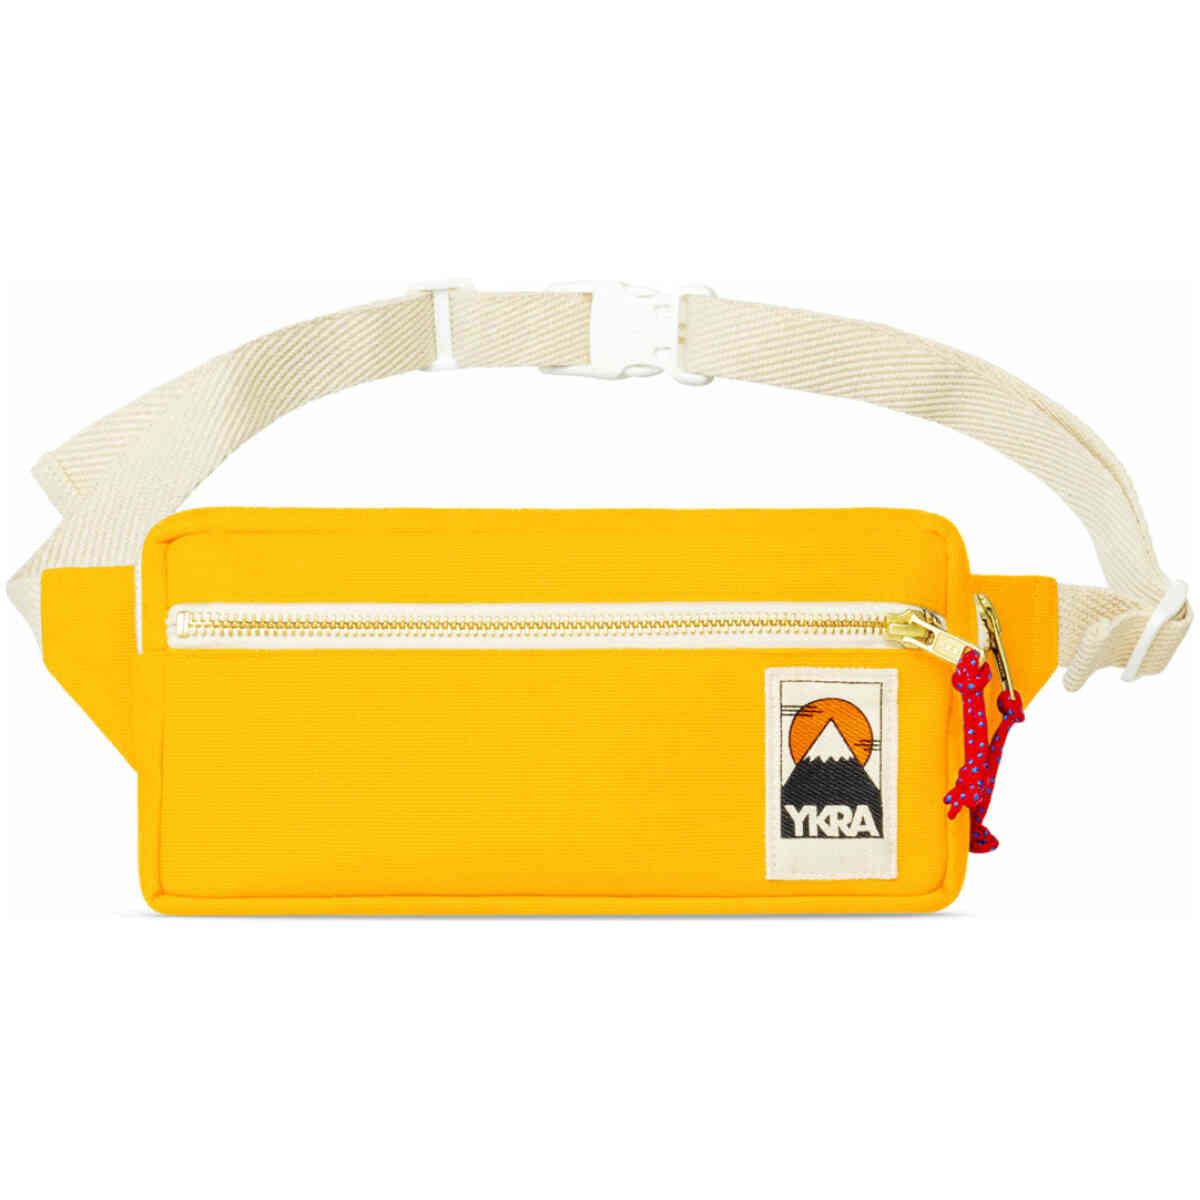 ykra 20 fannypack front yellow